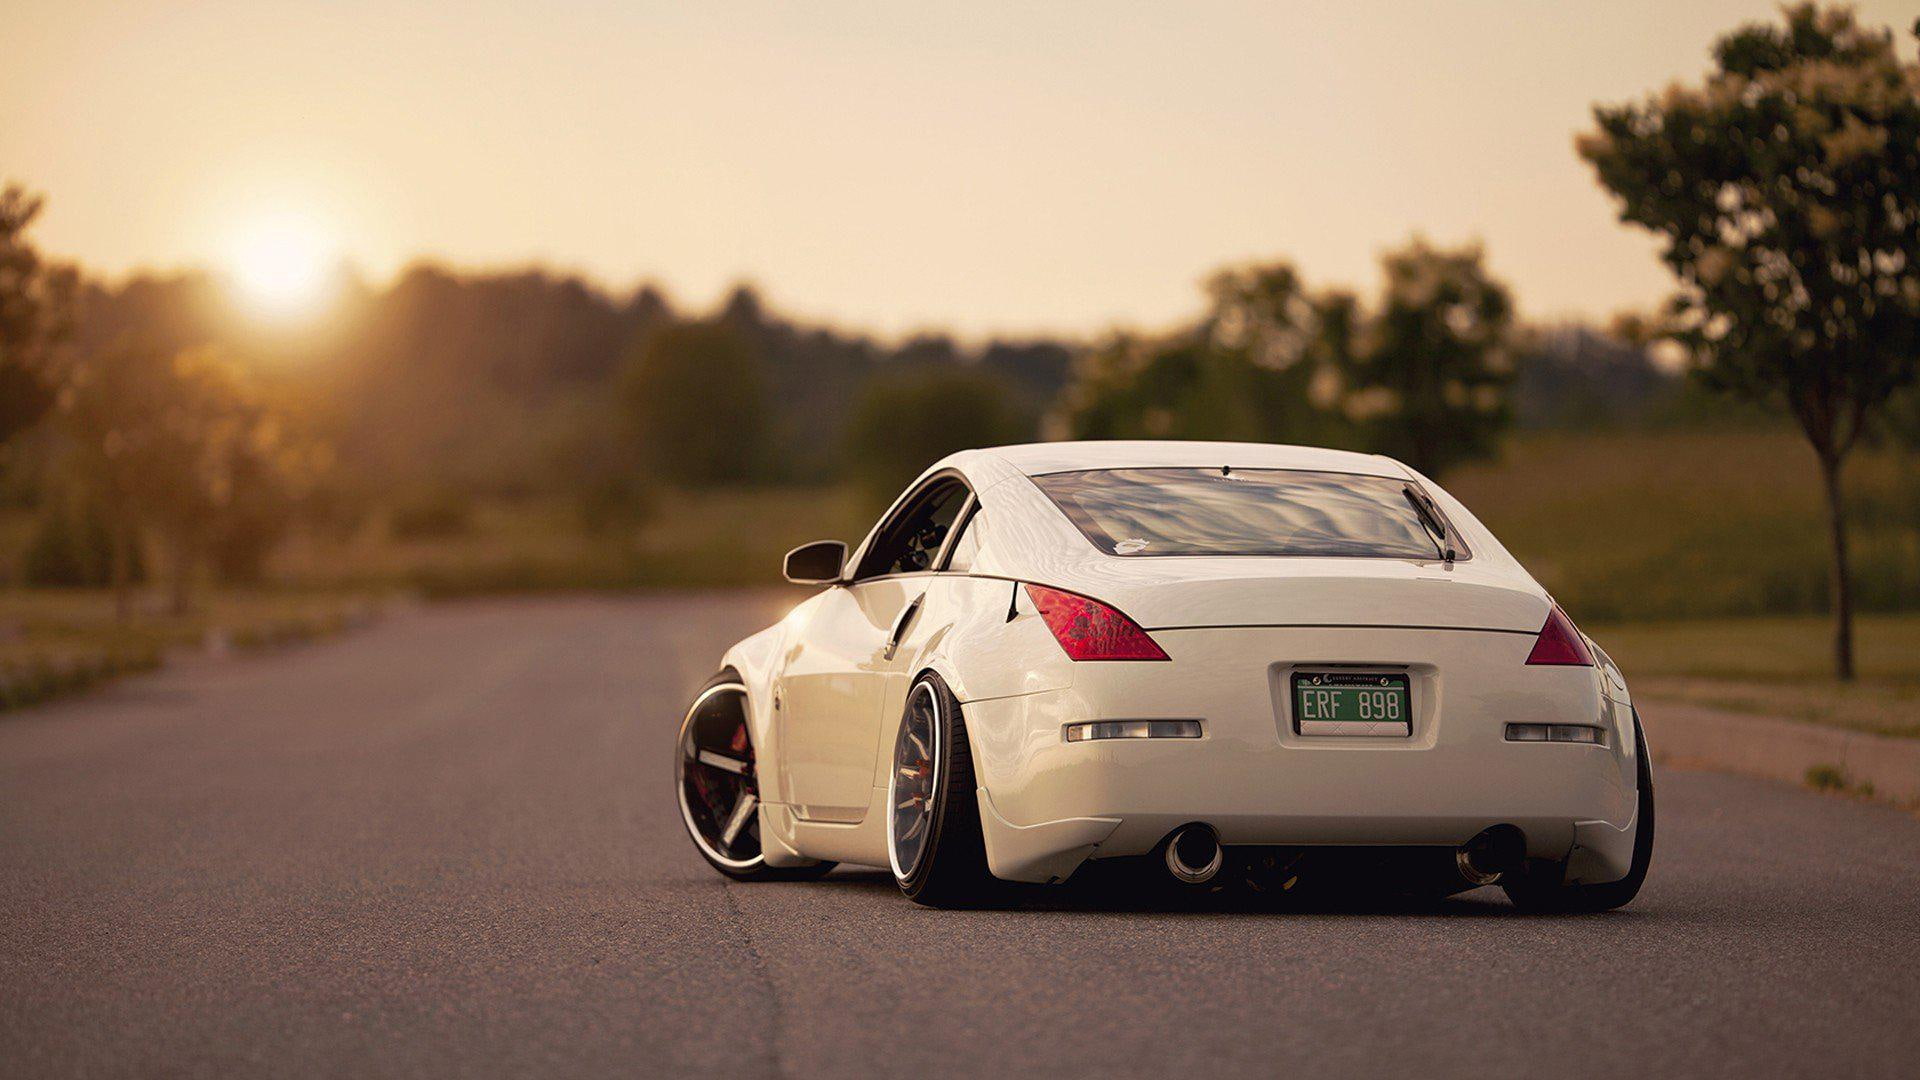 Cars Nissan 350z Jdm Japanese Domestic Market High Quality Picture, white coupe